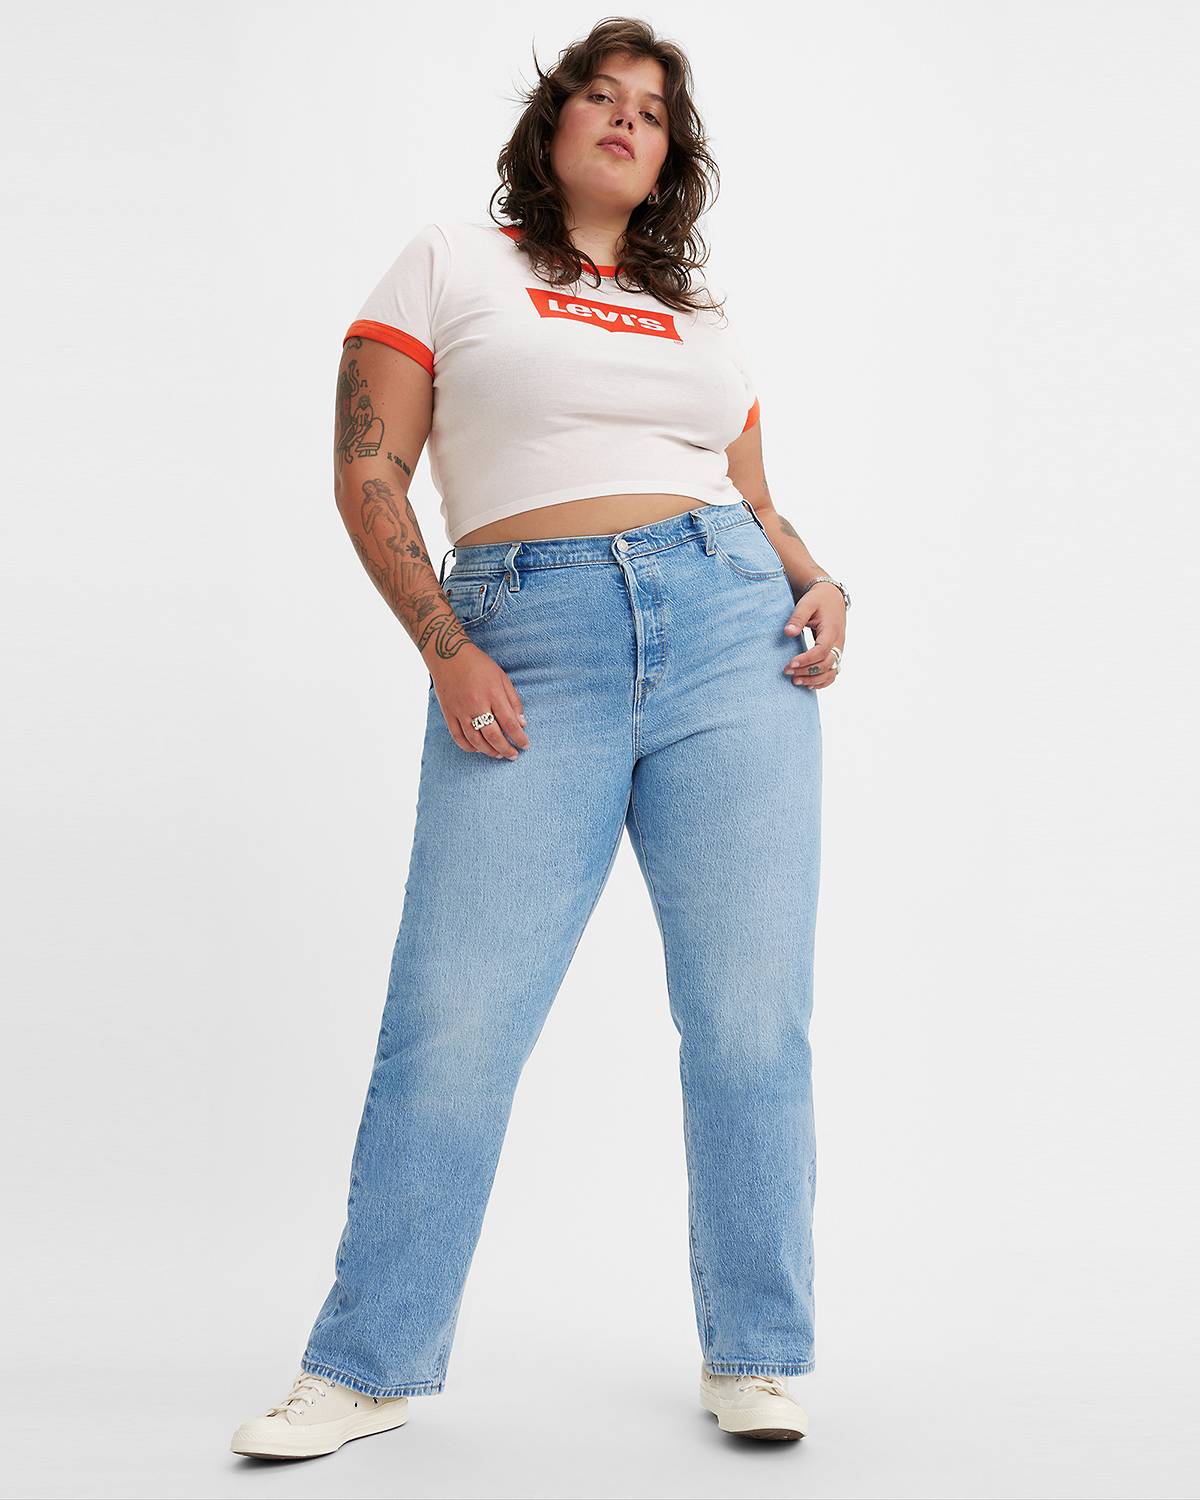 Model wearing light-wash denim jeans and a white Levi's tee with red finishes.